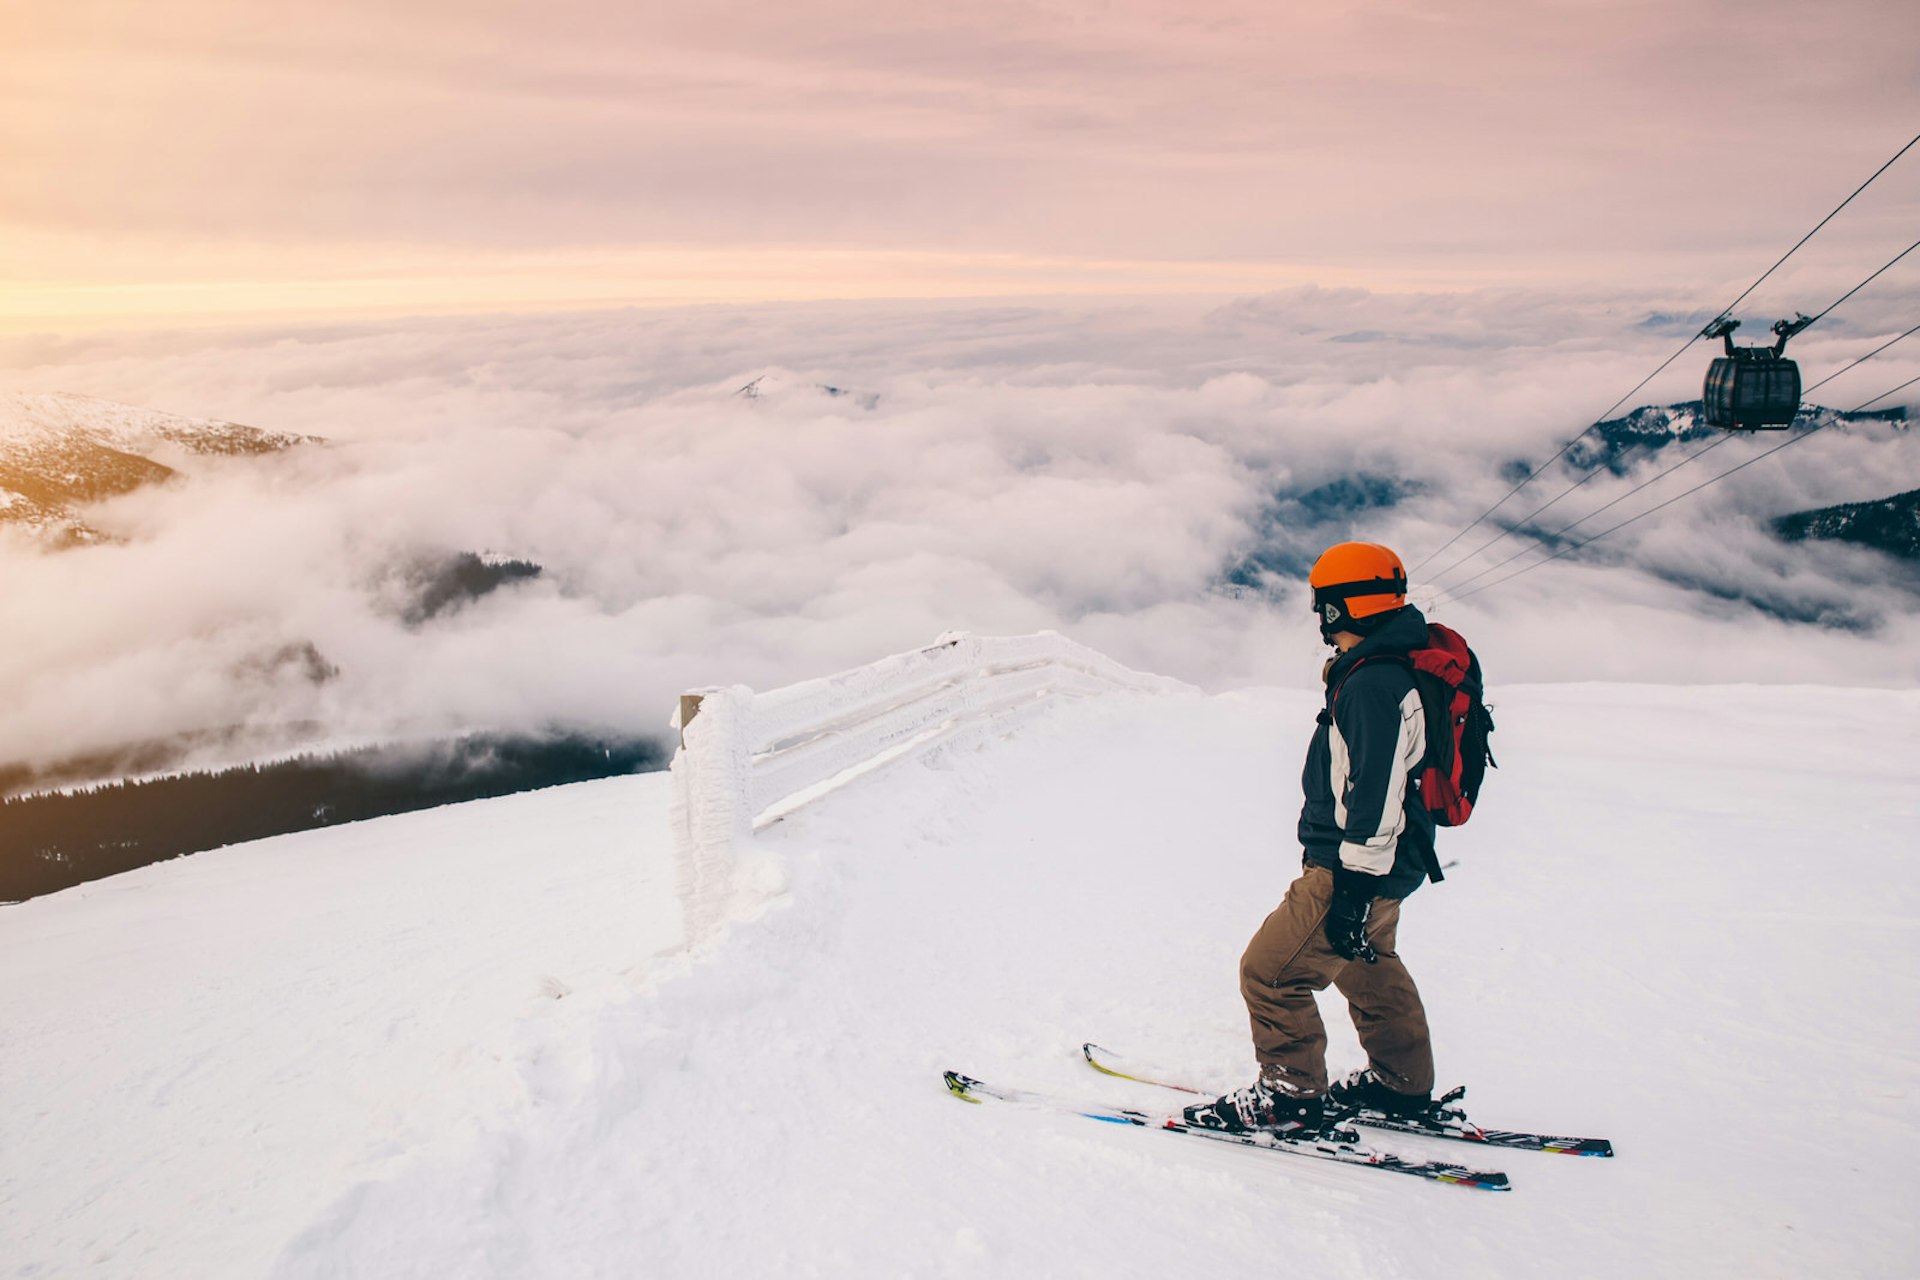 Skier at the summit of a mountain in Slovakia; there is cloud cover below and a chairlift rising to the right.